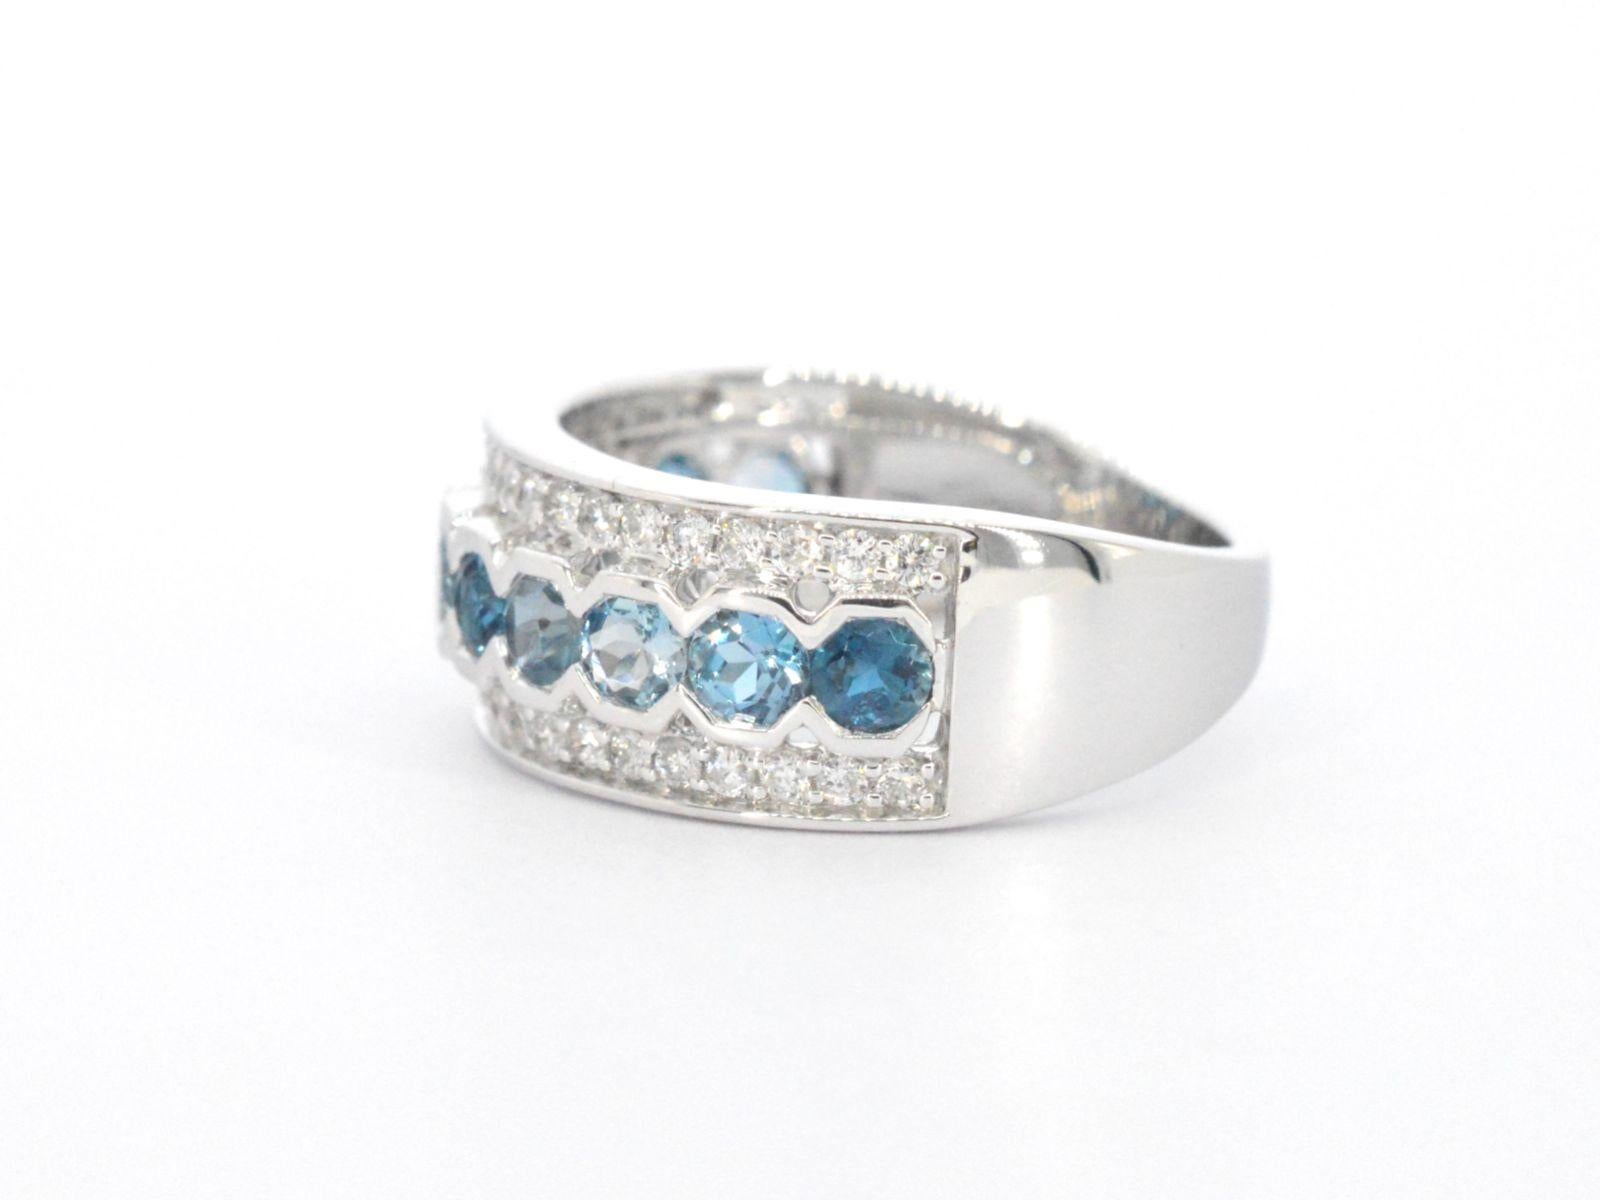 Women's White Gold Pave Ring with Diamonds and Topaz For Sale